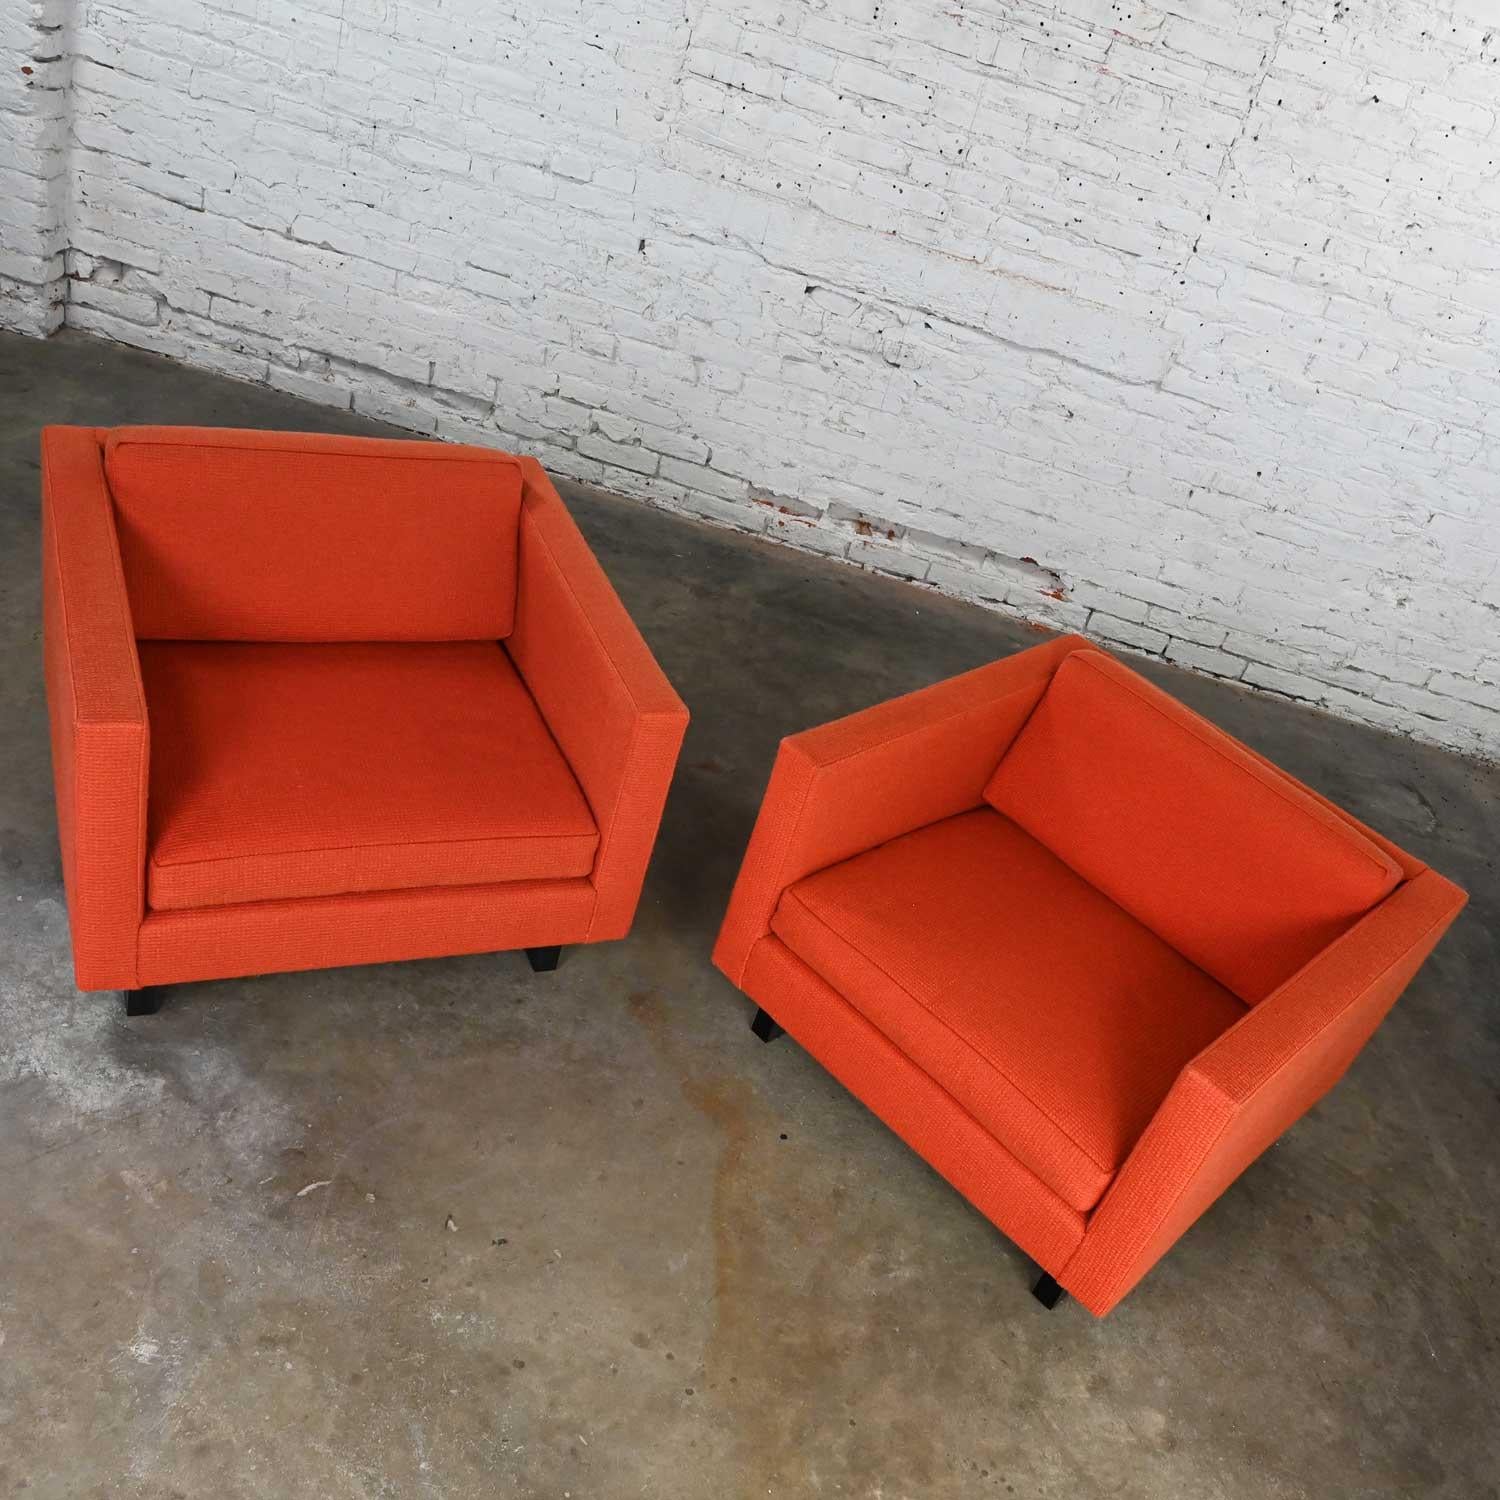 1970s Mcm to Modern Harvey Probber Club Chairs Orange 1571 Tuxedo Sleigh Bases In Good Condition For Sale In Topeka, KS